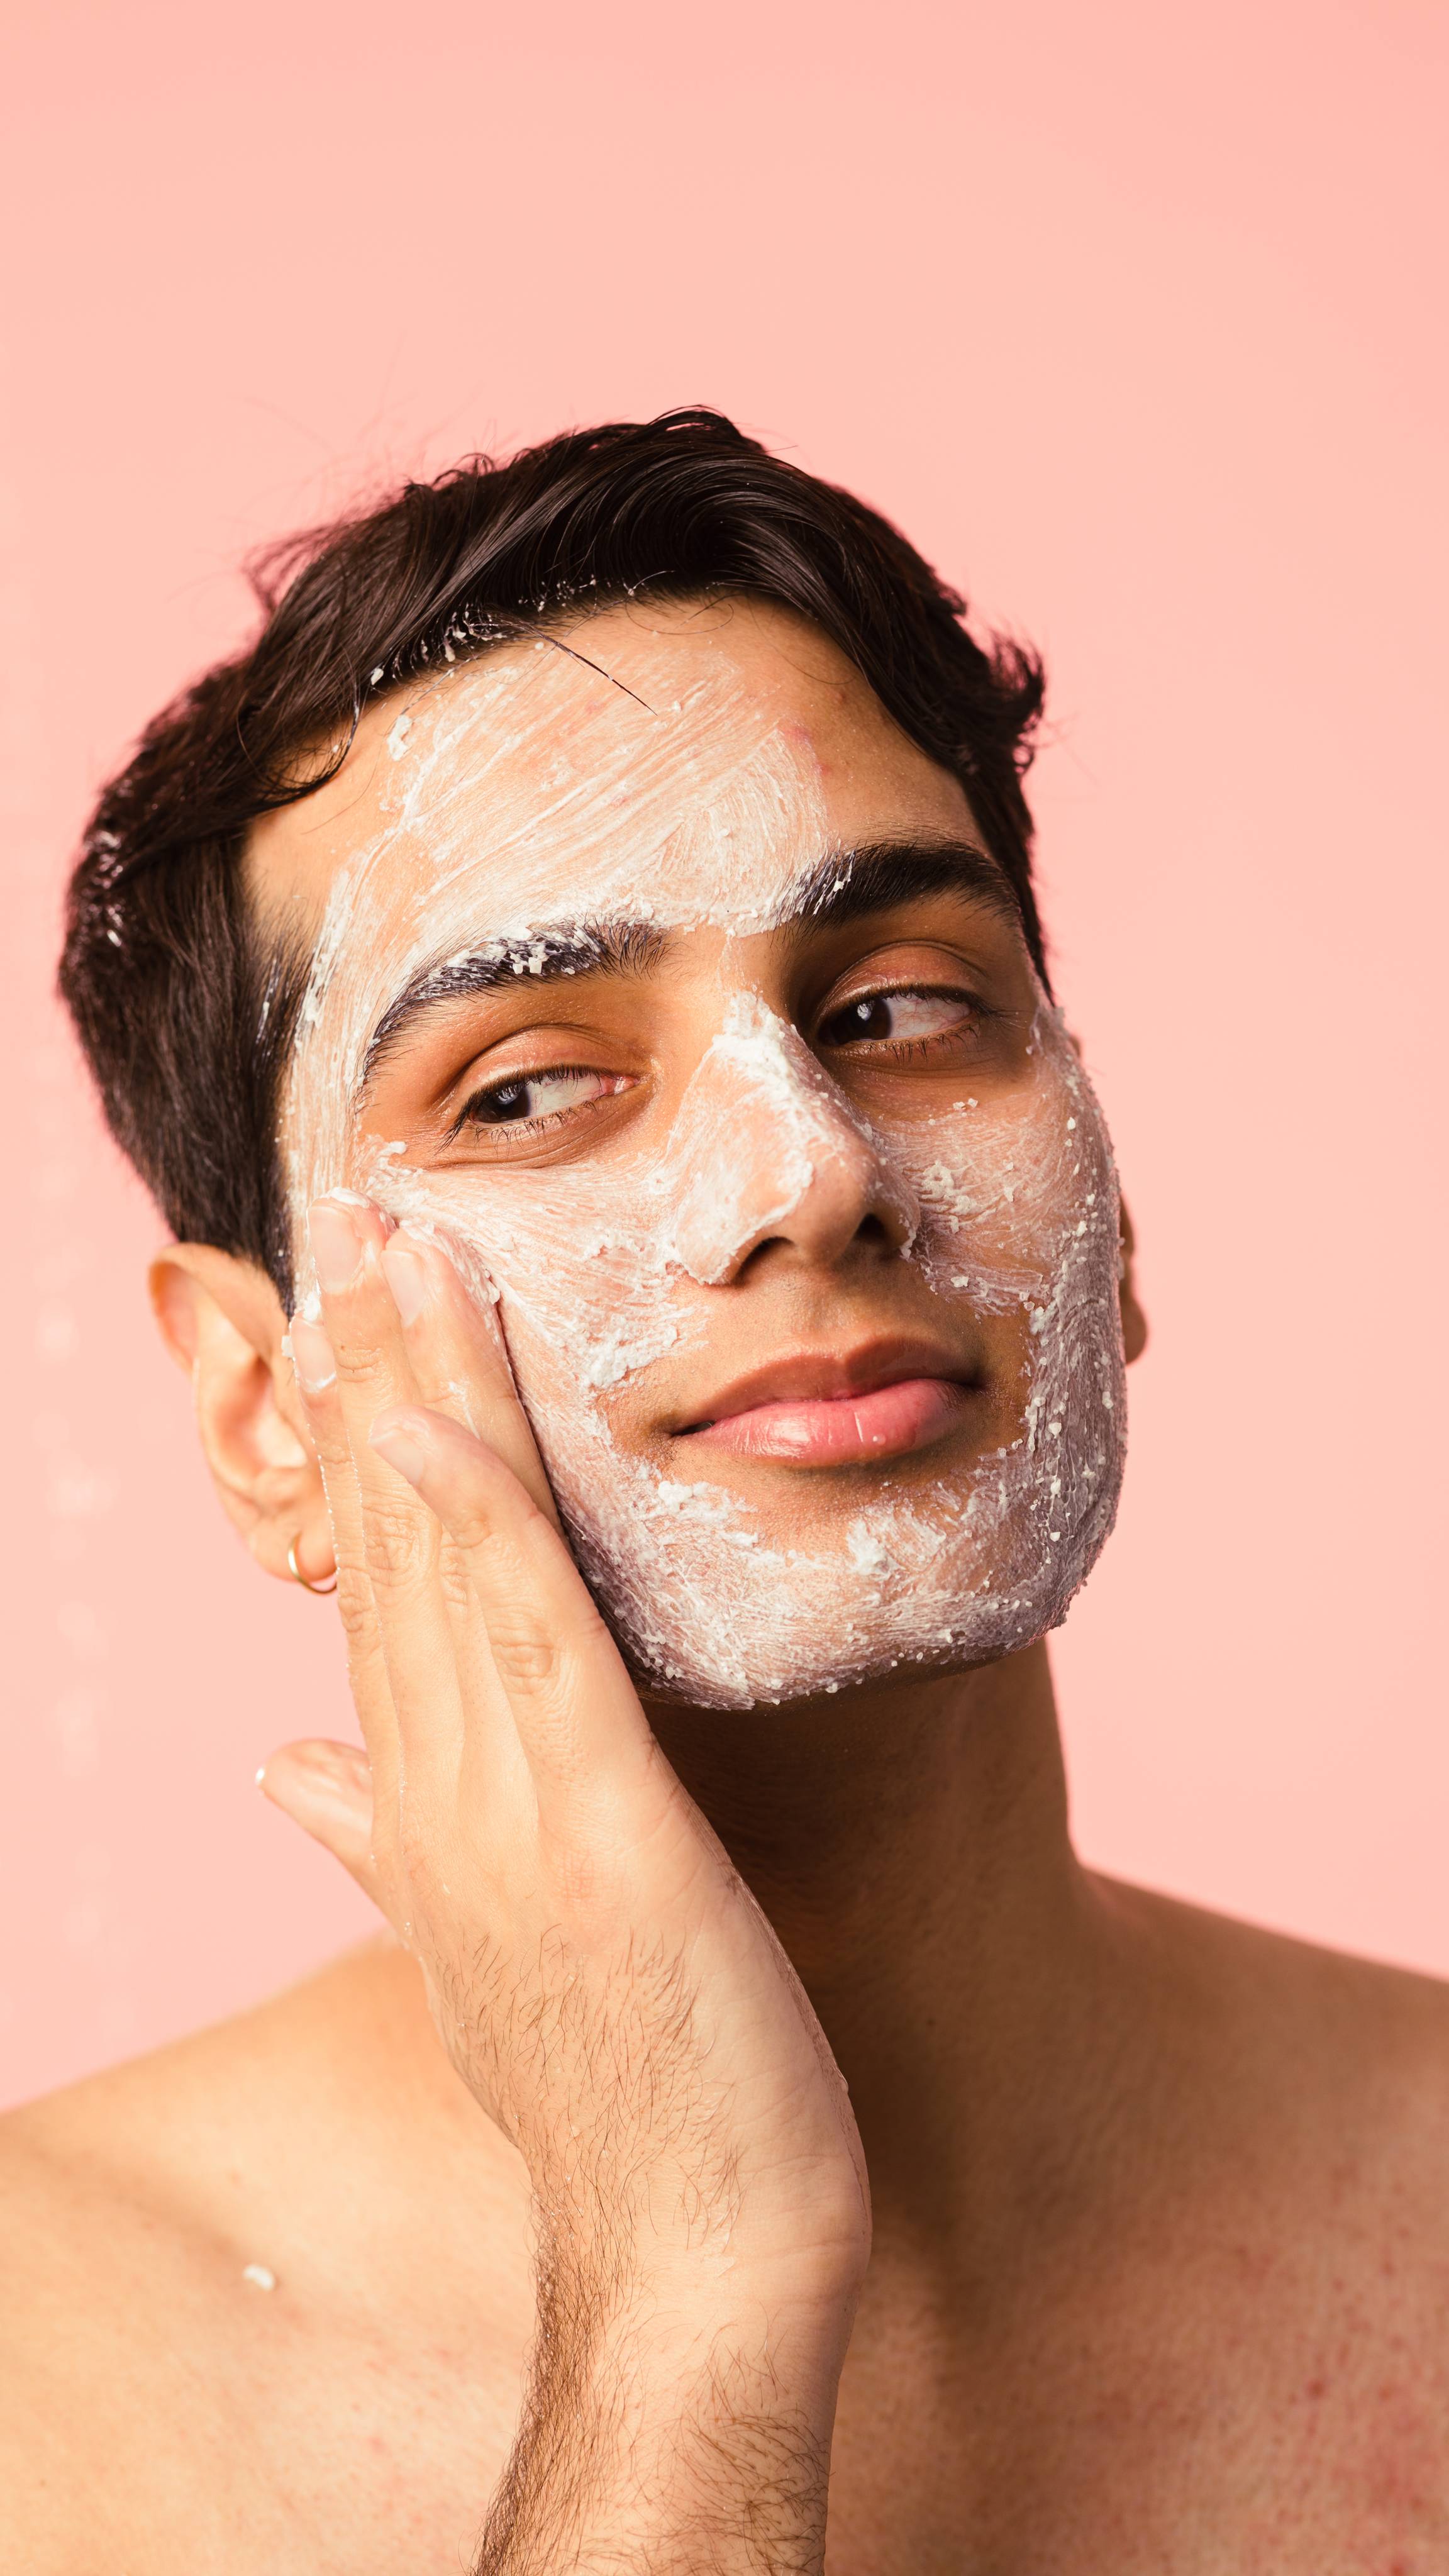 Model is applying the exfoliating Ocean Salt scrub gently onto their face on a light beige background.